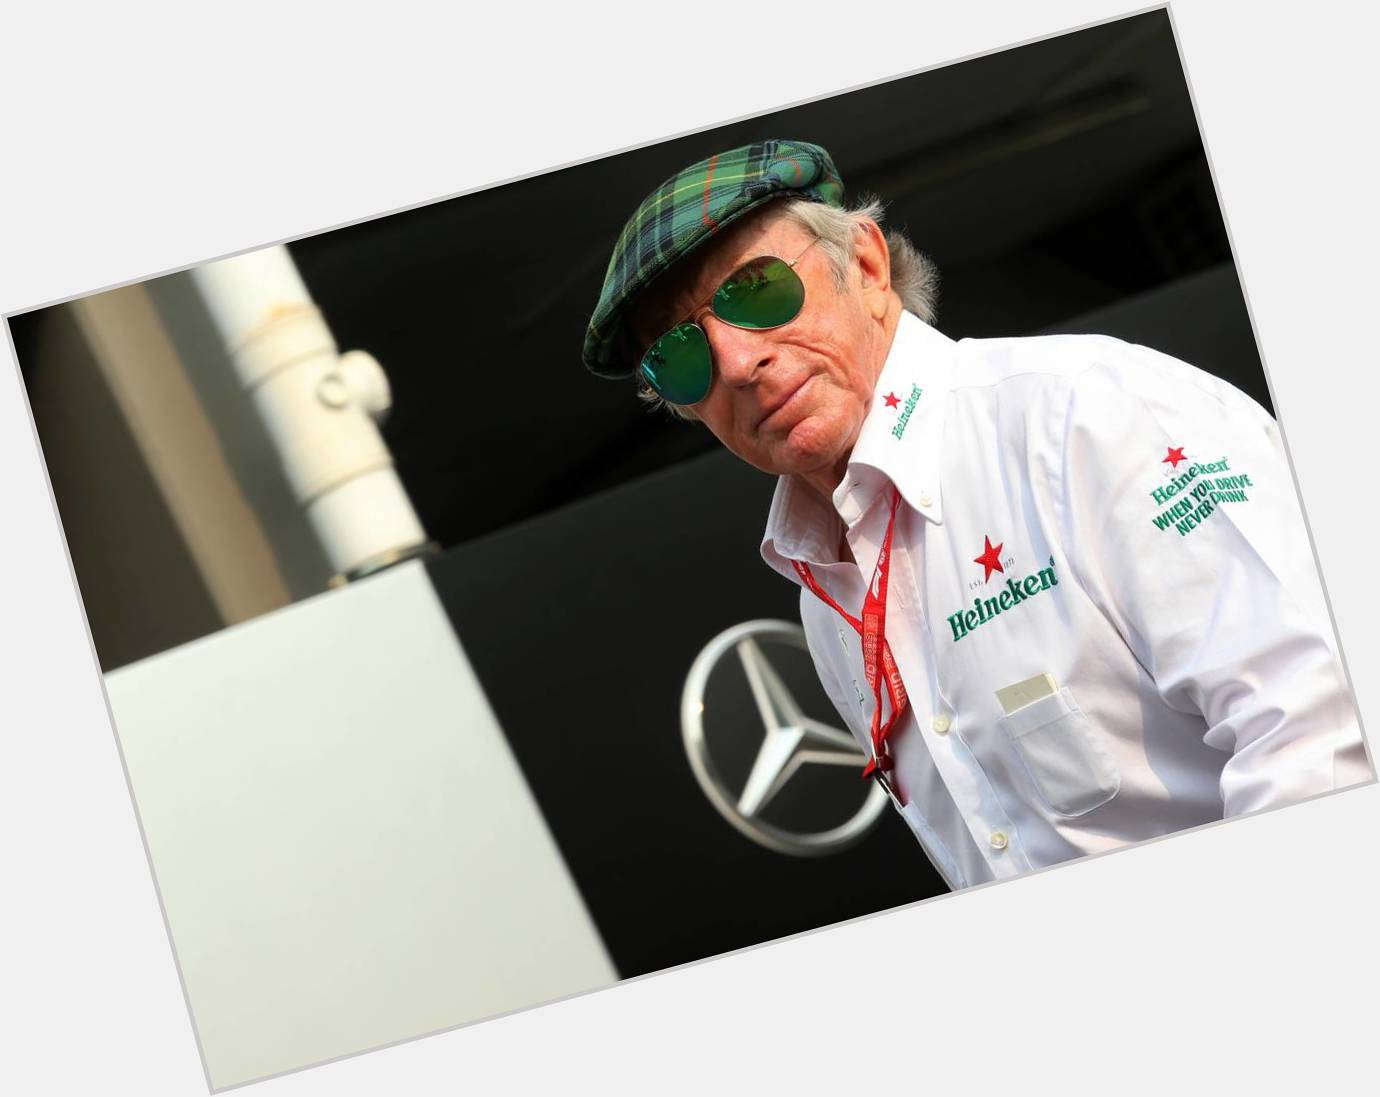  Happy Birthday to 3-time World Champion Sir Jackie Stewart!

He turns 82 today! 